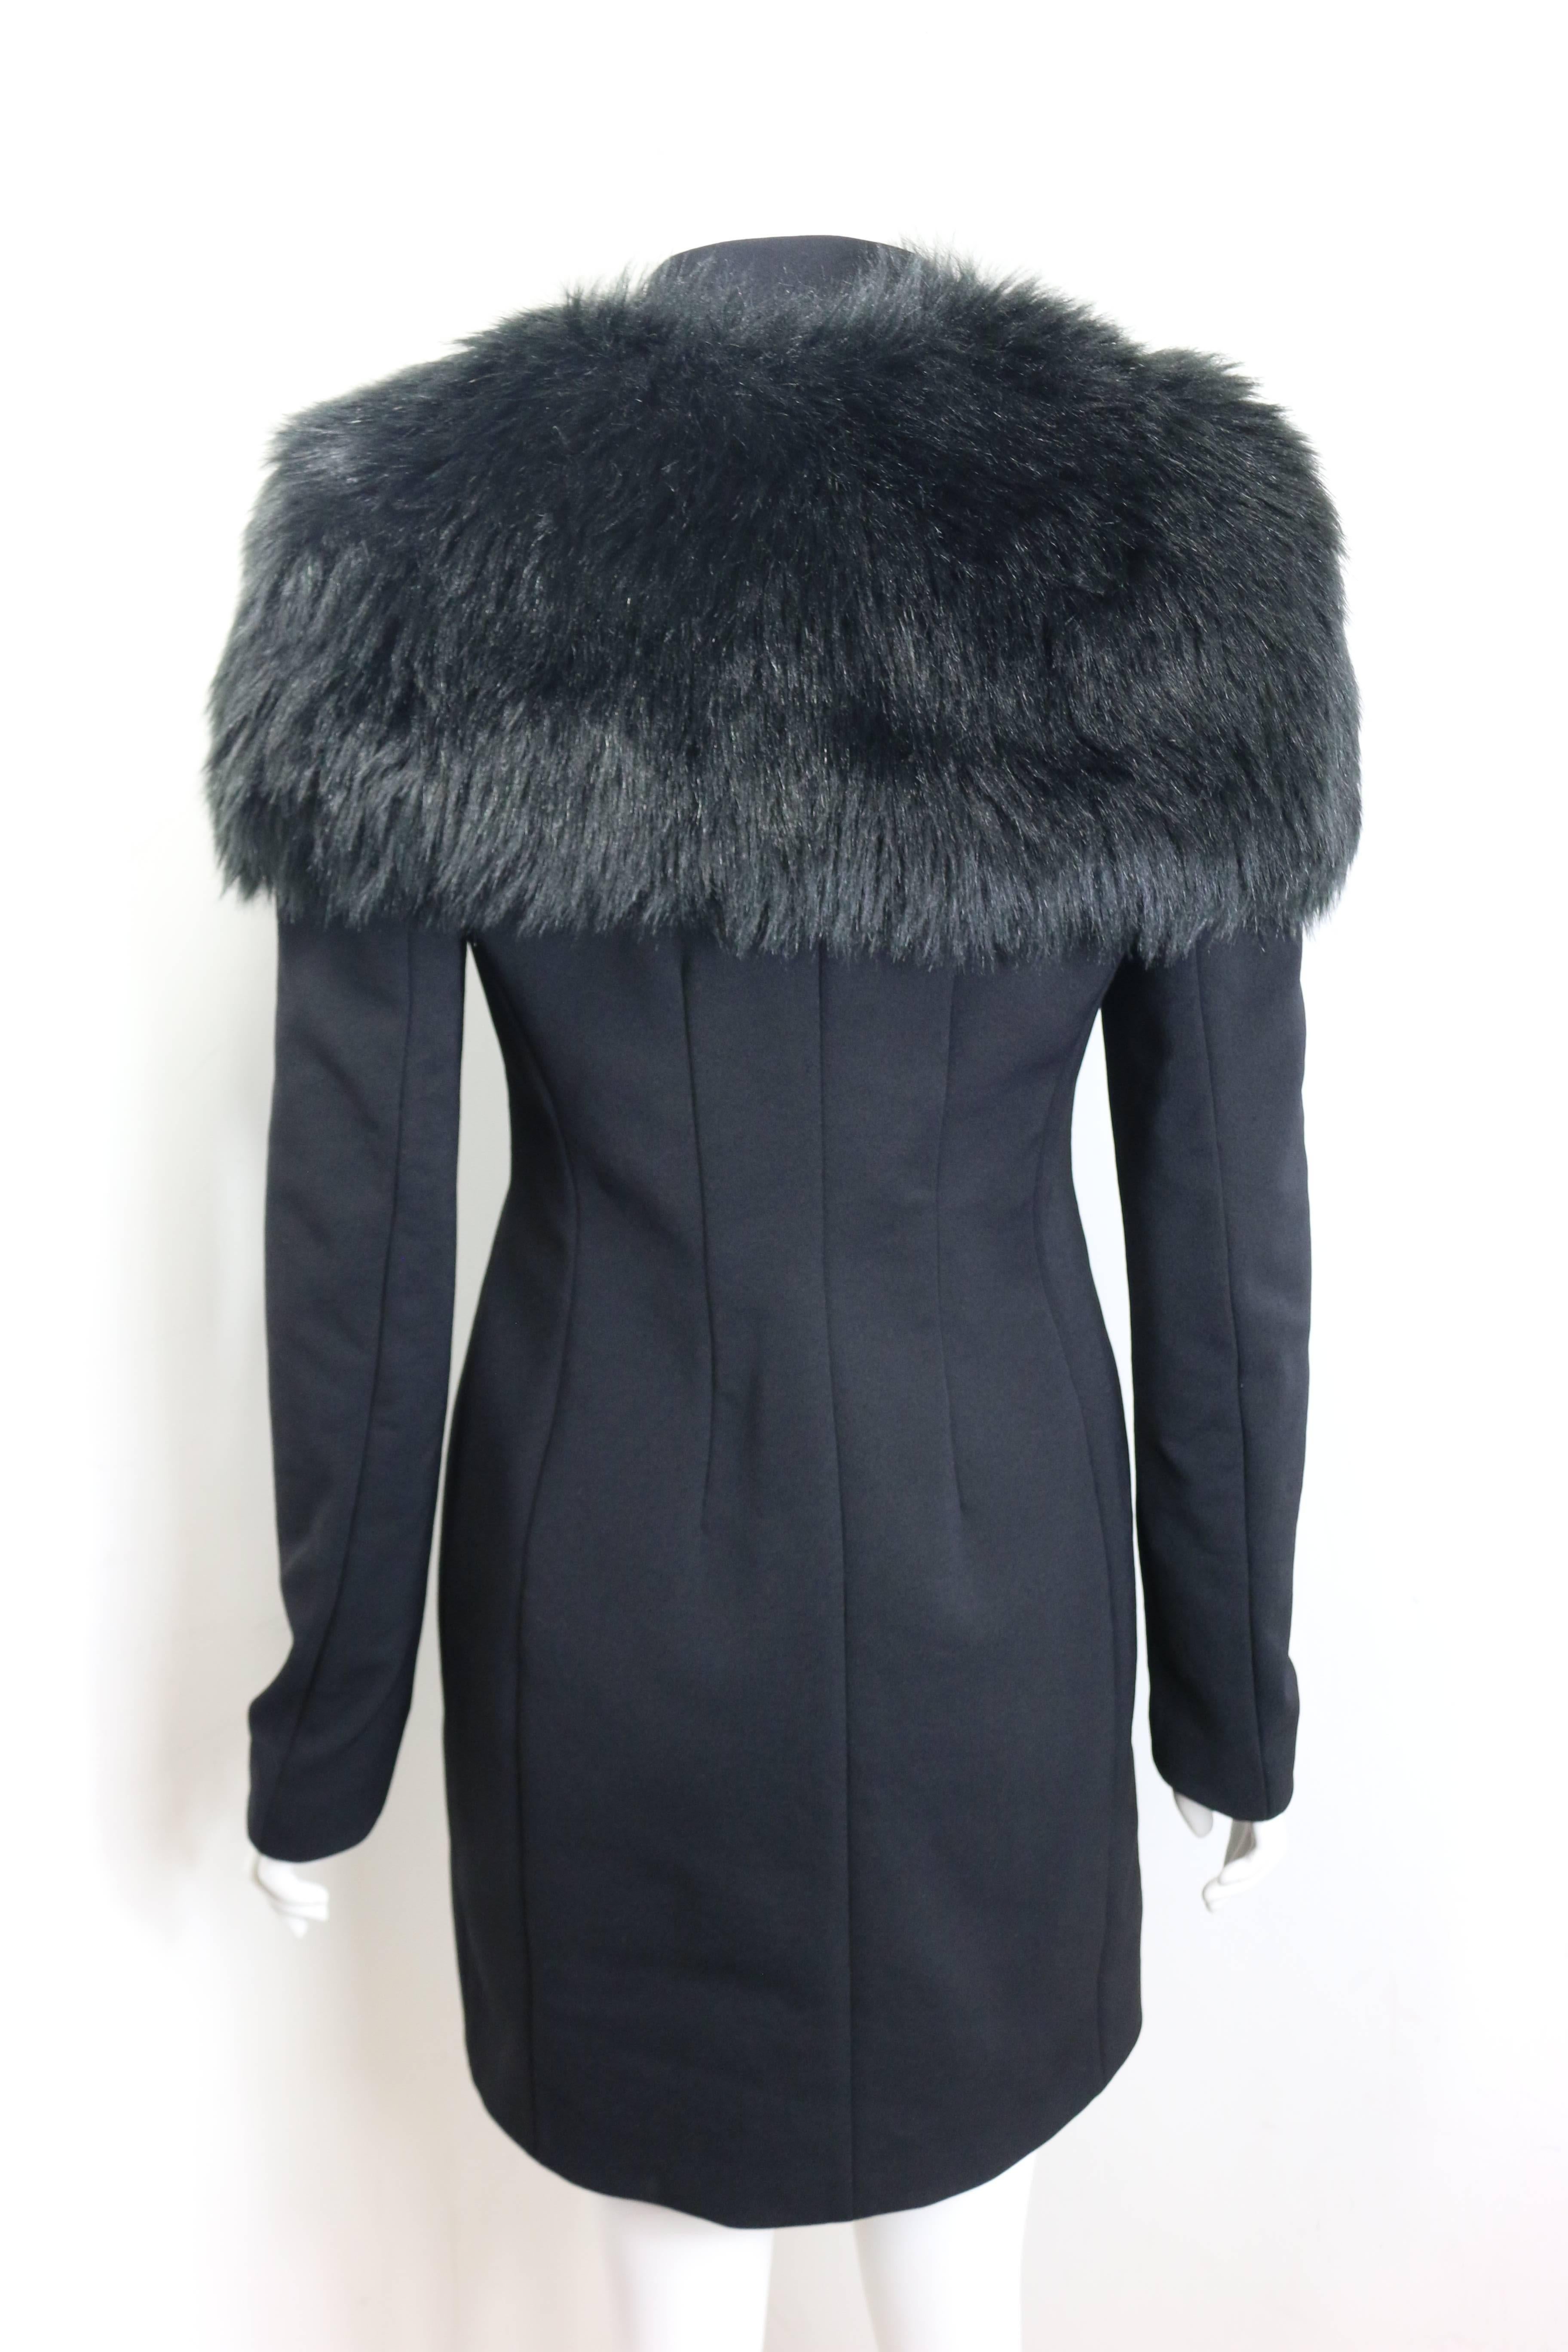 Prada Black Nylon with Detachable Black Faux Fur Jacket  In Excellent Condition For Sale In Sheung Wan, HK